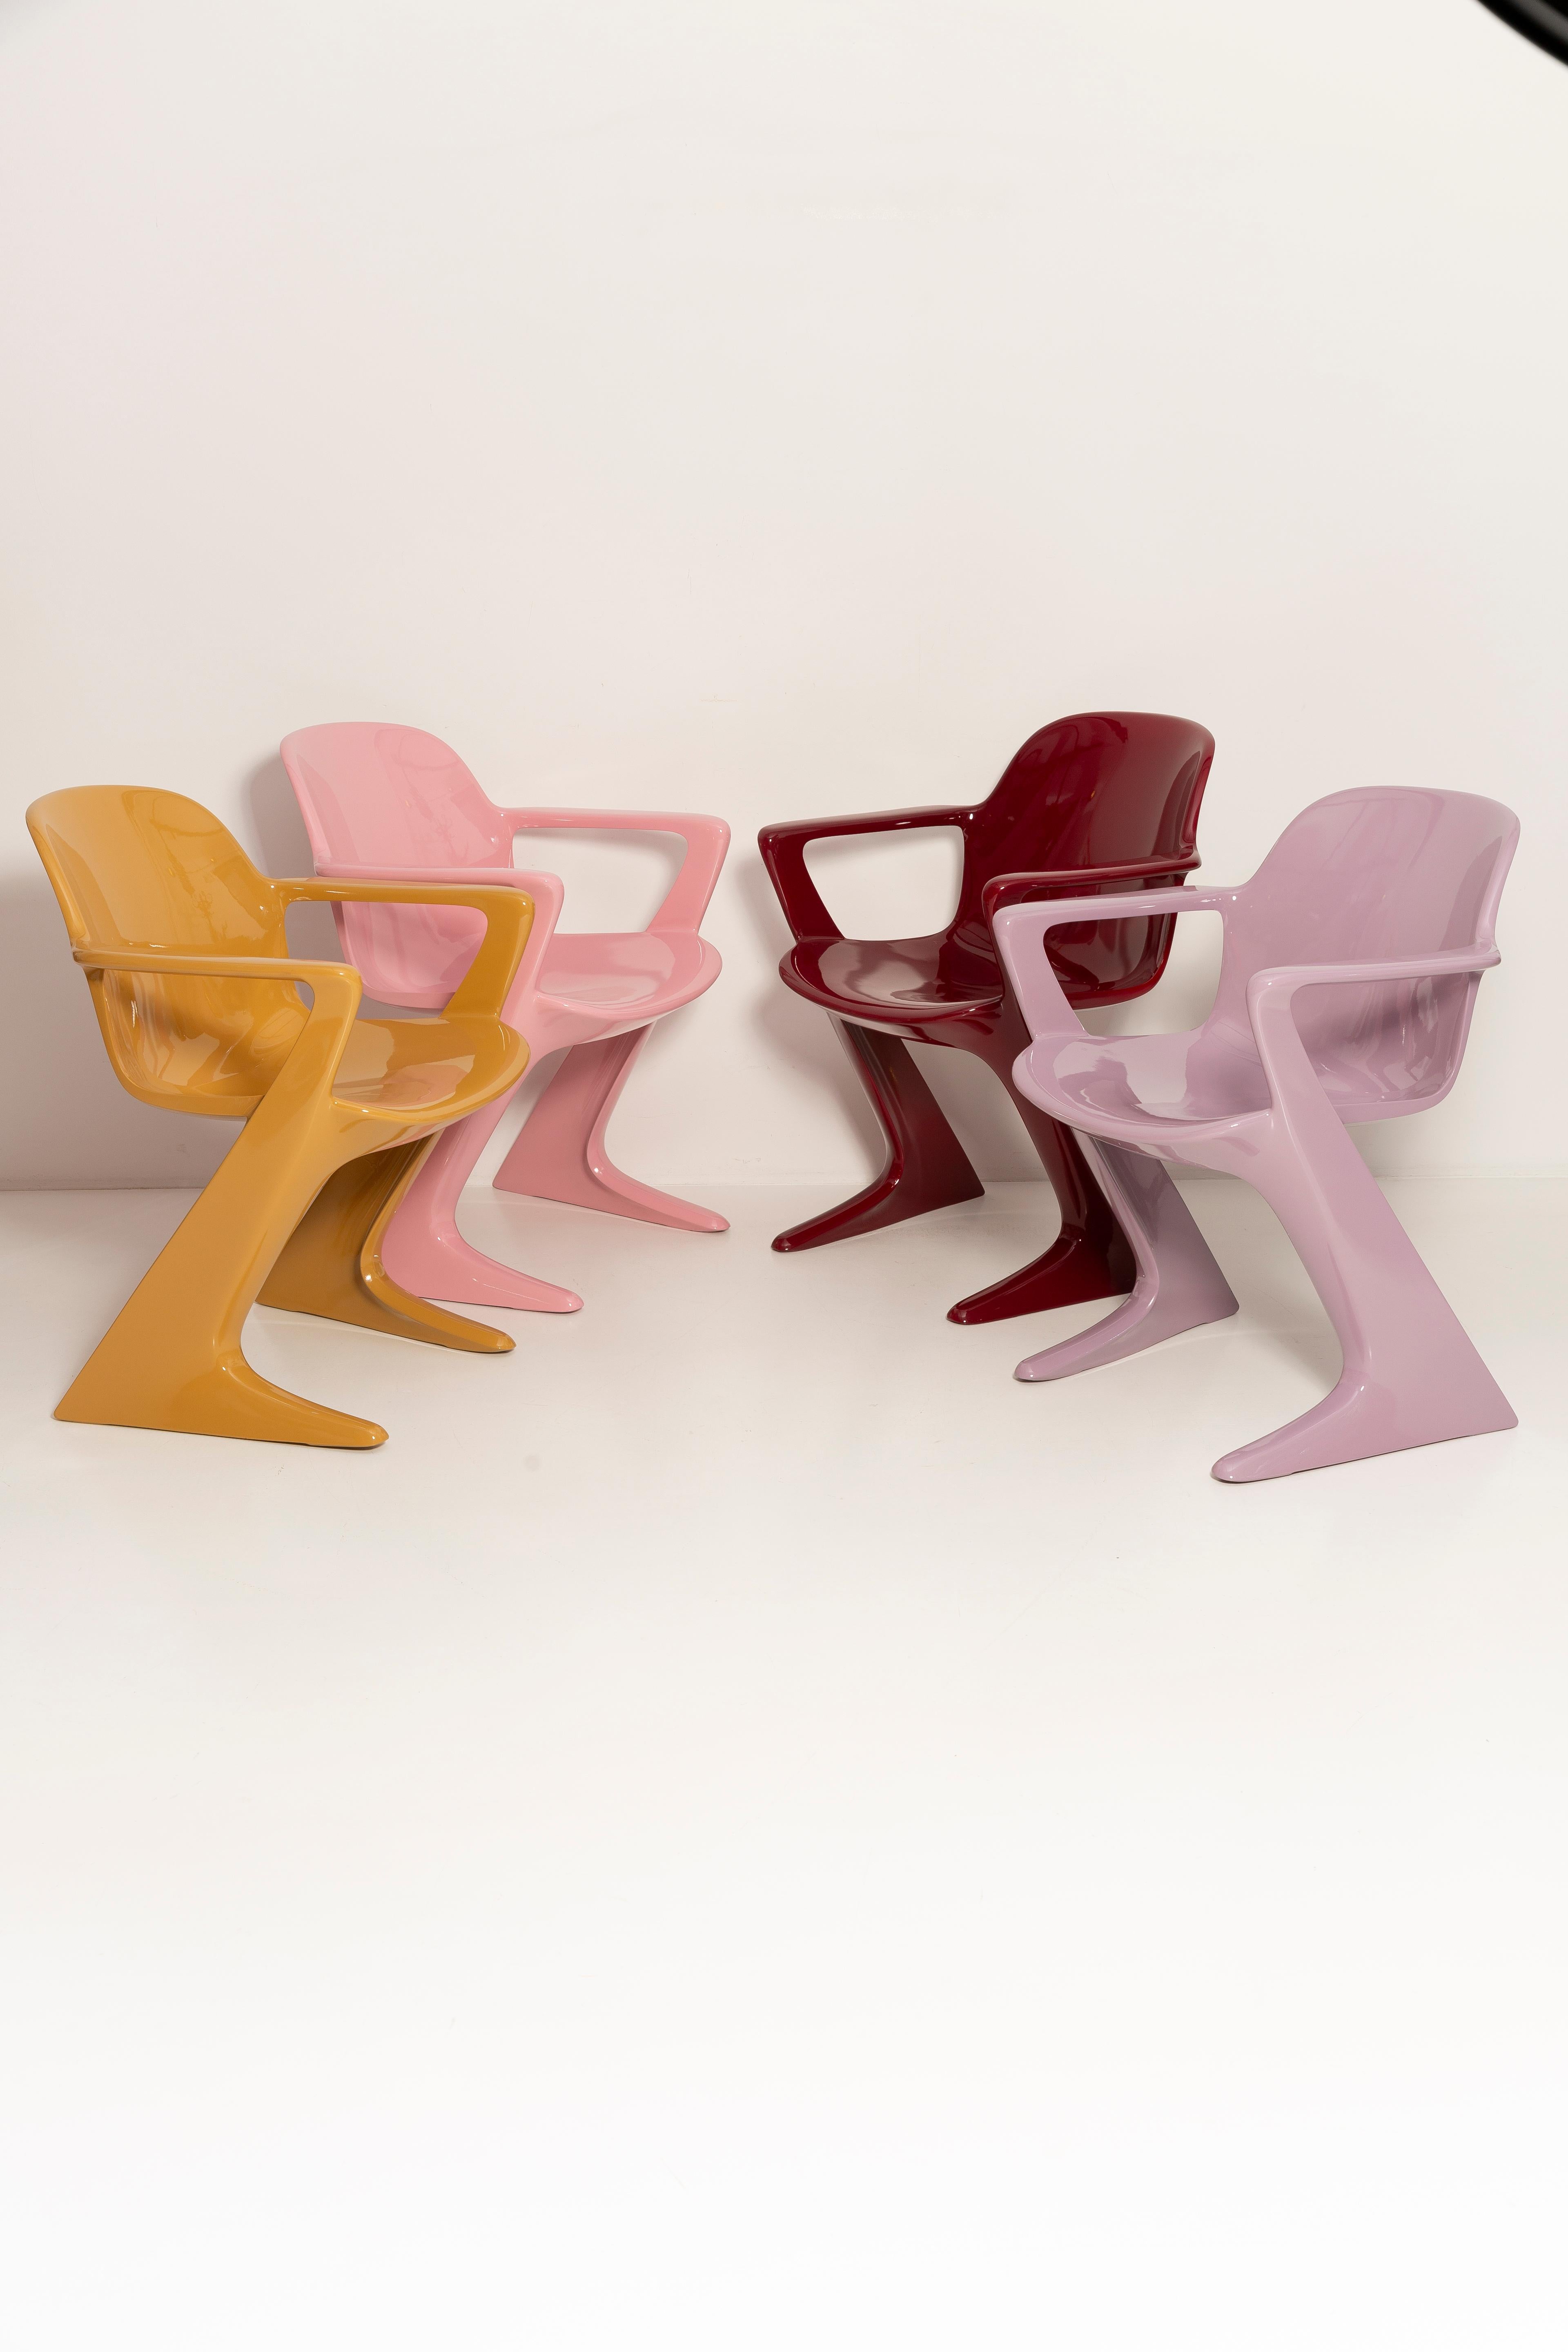 Set of Six Mid Century Kangaroo Chairs, Ernst Moeckl, Germany, 1968 For Sale 12